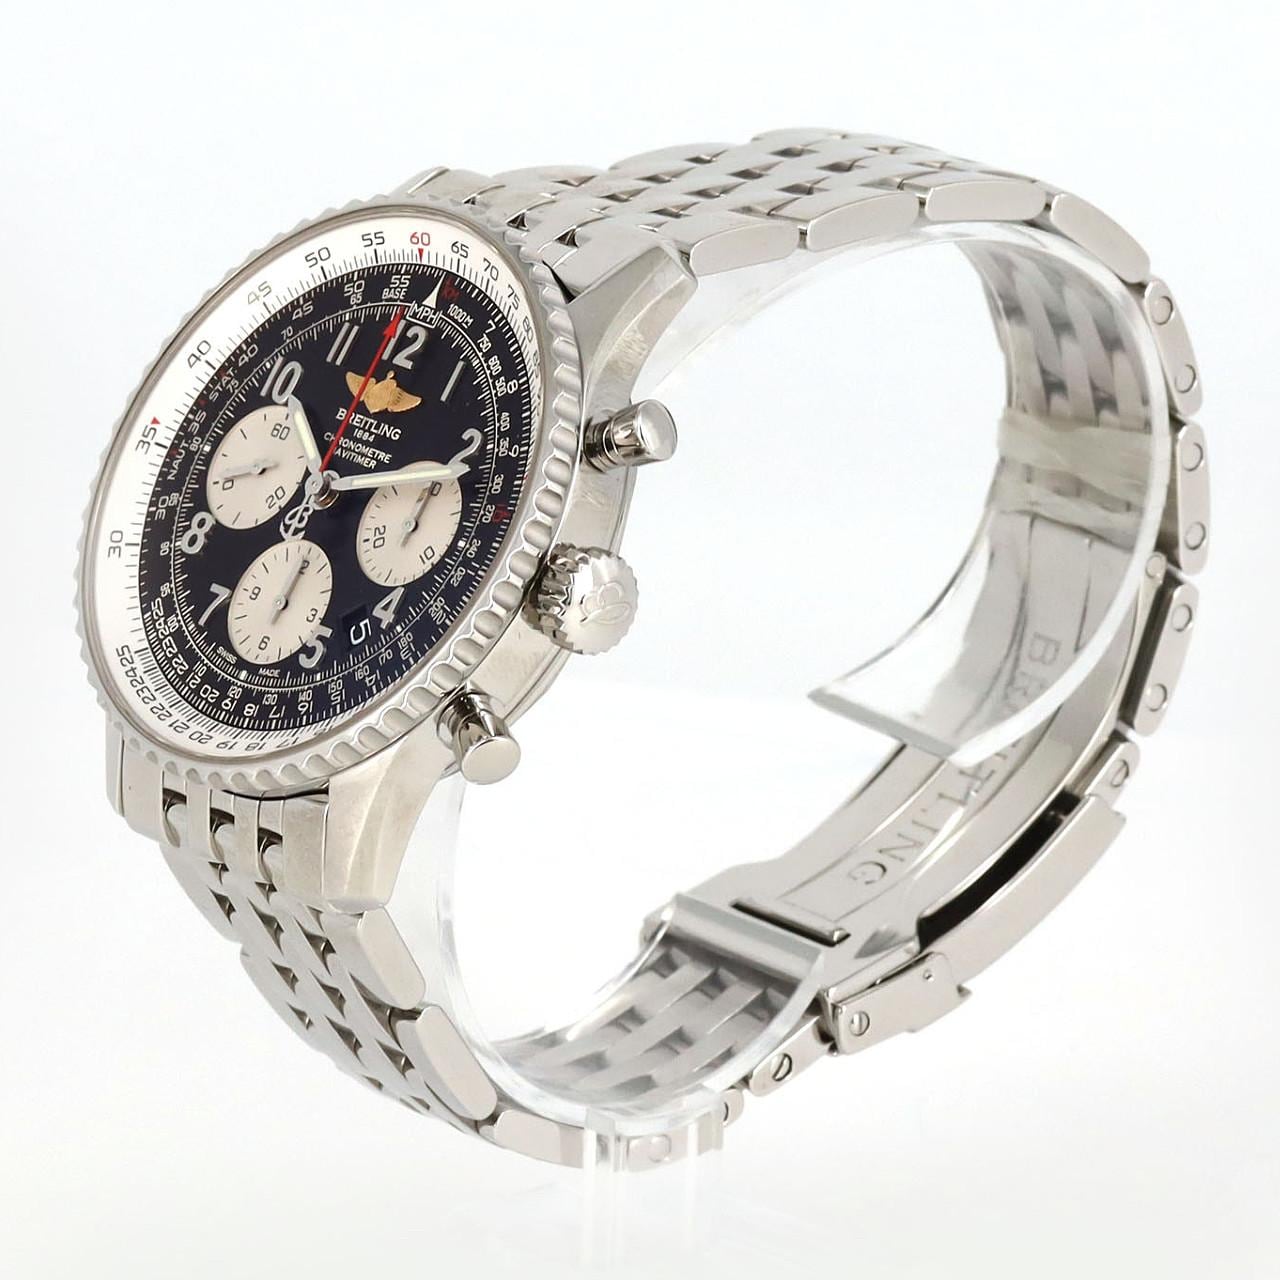 BREITLING Navitimer 01 AB0120/A022B02NP SS Automatic